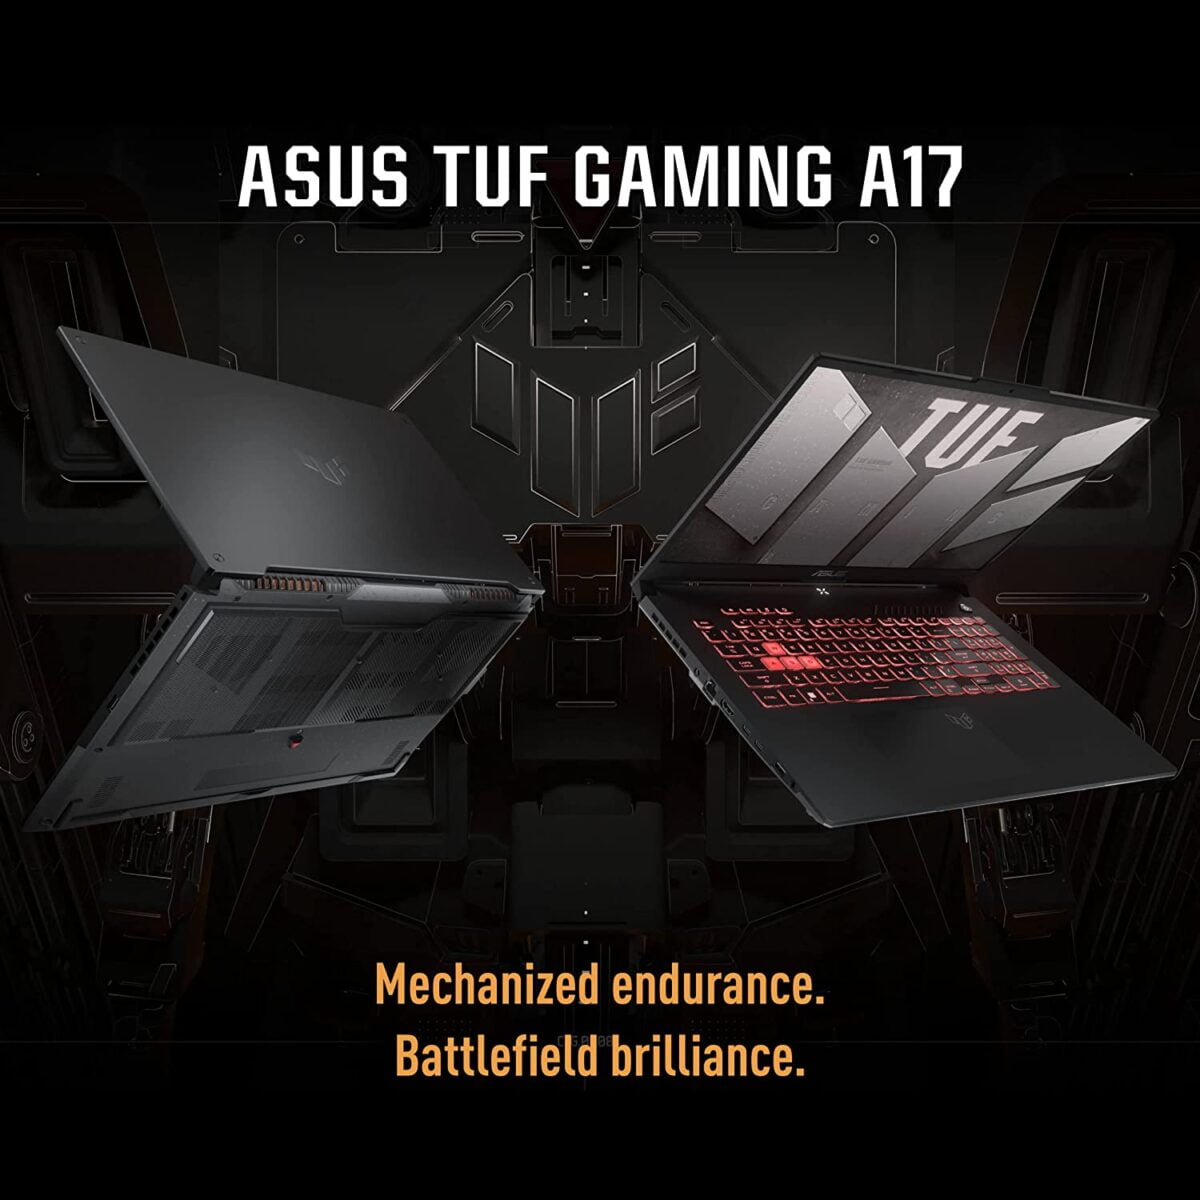 ASUS TUF Gaming A17 2022 FA707RE-MS73 Gaming Laptop Listed on Amazon US ( AMD Ryzen 7 6800H / Nvidia RTX 3050 / 16GB / 512GB SSD )